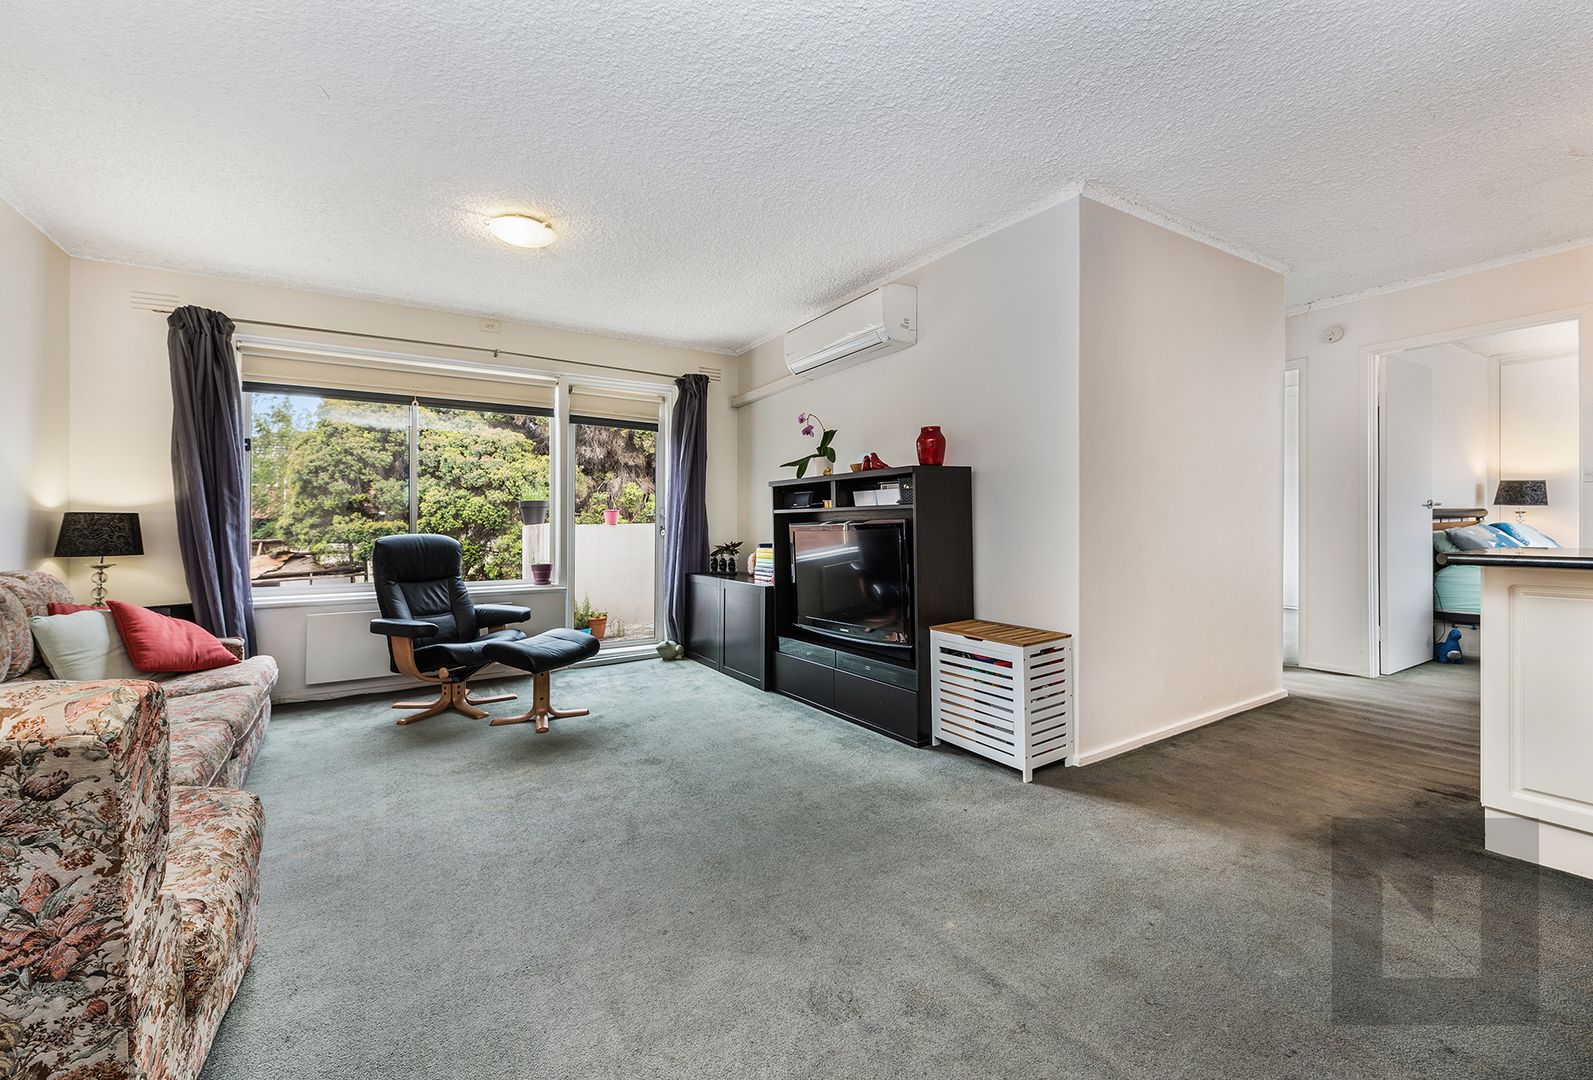 2 bedrooms Apartment / Unit / Flat in 13/97-99 Raleigh Road MARIBYRNONG VIC, 3032